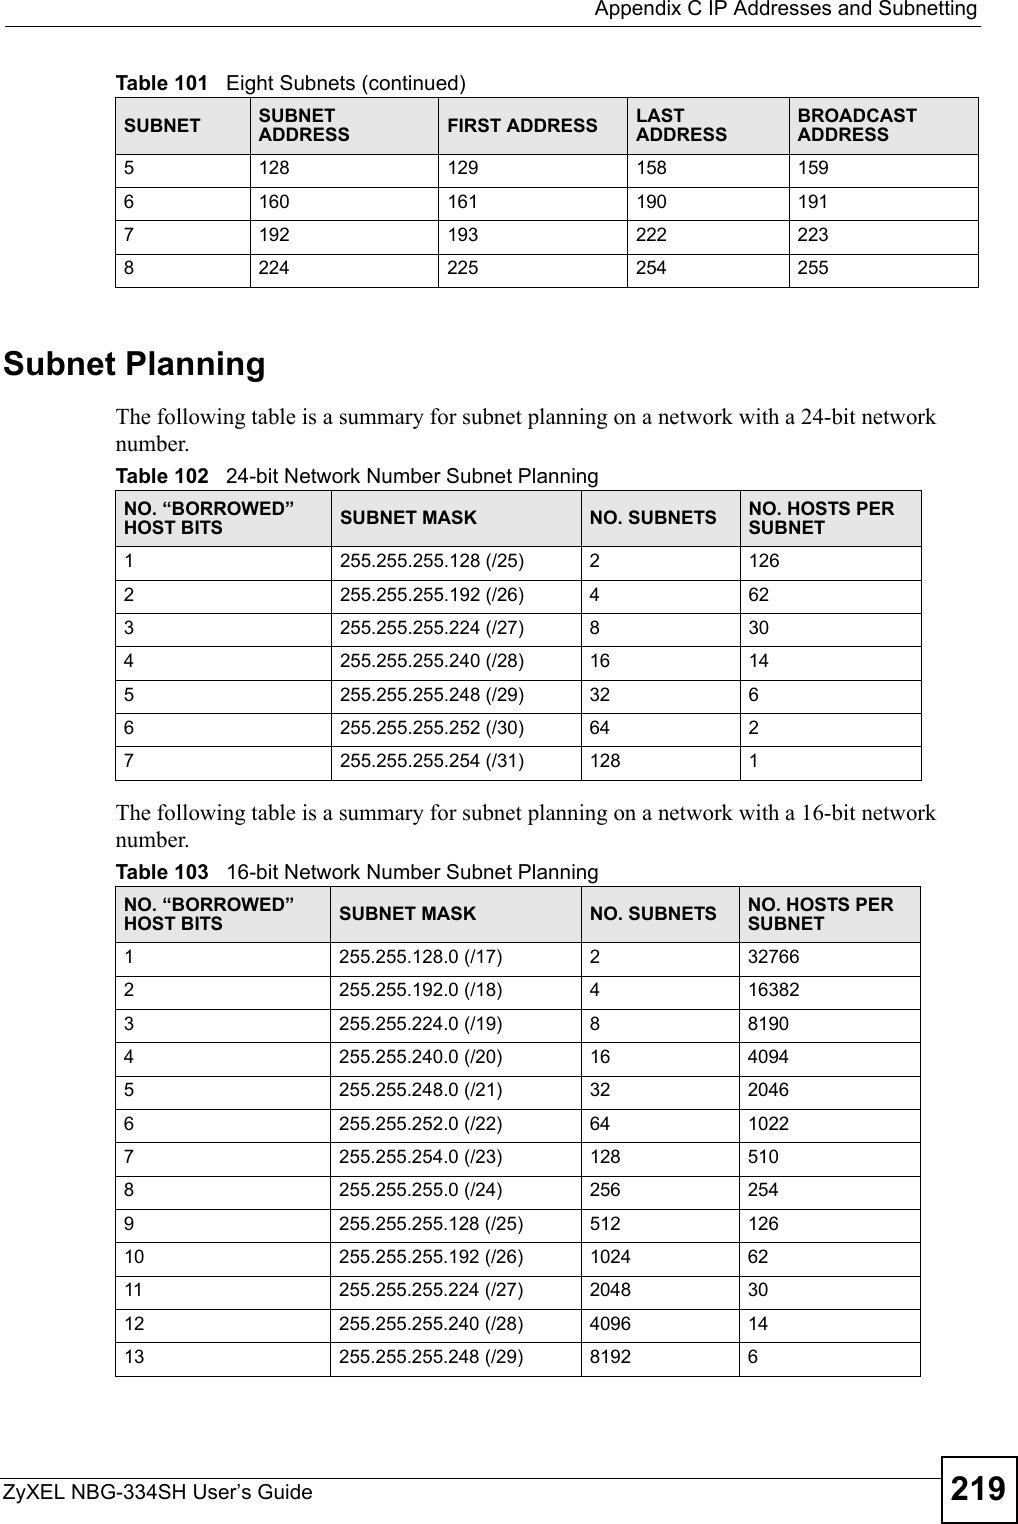  Appendix C IP Addresses and SubnettingZyXEL NBG-334SH User’s Guide 219Subnet PlanningThe following table is a summary for subnet planning on a network with a 24-bit network number.The following table is a summary for subnet planning on a network with a 16-bit network number. 5128 129 158 1596160 161 190 1917192 193 222 2238224 225 254 255Table 101   Eight Subnets (continued)SUBNET SUBNET ADDRESS FIRST ADDRESS LAST ADDRESSBROADCAST ADDRESSTable 102   24-bit Network Number Subnet PlanningNO. “BORROWED” HOST BITS SUBNET MASK NO. SUBNETS NO. HOSTS PER SUBNET1255.255.255.128 (/25) 21262255.255.255.192 (/26) 4623255.255.255.224 (/27) 8304255.255.255.240 (/28) 16 145255.255.255.248 (/29) 32 66255.255.255.252 (/30) 64 27255.255.255.254 (/31) 128 1Table 103   16-bit Network Number Subnet PlanningNO. “BORROWED” HOST BITS SUBNET MASK NO. SUBNETS NO. HOSTS PER SUBNET1255.255.128.0 (/17) 2327662255.255.192.0 (/18) 4163823255.255.224.0 (/19) 881904255.255.240.0 (/20) 16 40945255.255.248.0 (/21) 32 20466255.255.252.0 (/22) 64 10227255.255.254.0 (/23) 128 5108255.255.255.0 (/24) 256 2549255.255.255.128 (/25) 512 12610 255.255.255.192 (/26) 1024 6211 255.255.255.224 (/27) 2048 3012 255.255.255.240 (/28) 4096 1413 255.255.255.248 (/29) 8192 6